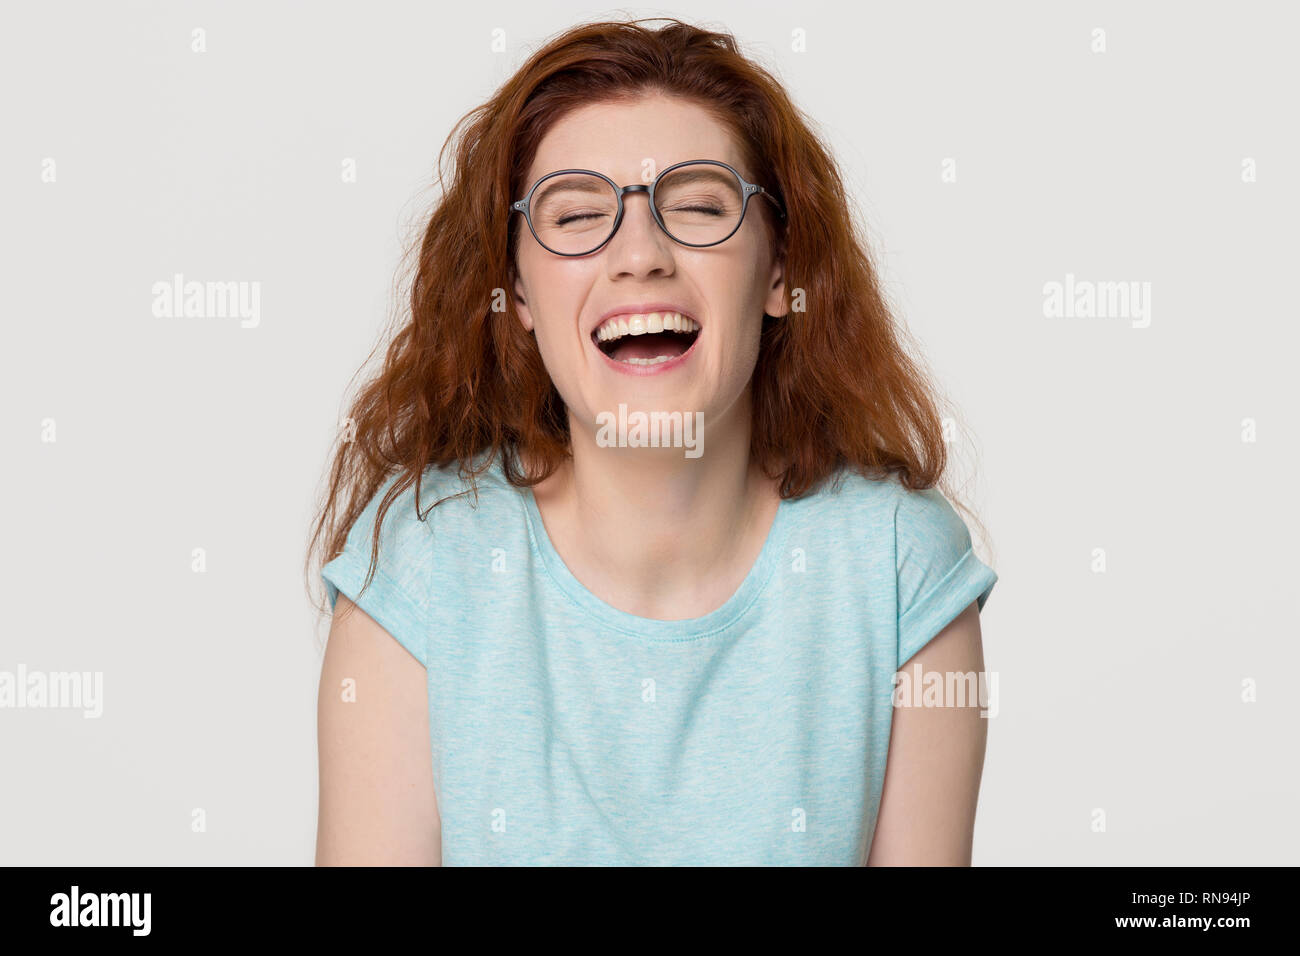 Cheerful happy red-haired young woman in glasses laughing out loud Stock Photo